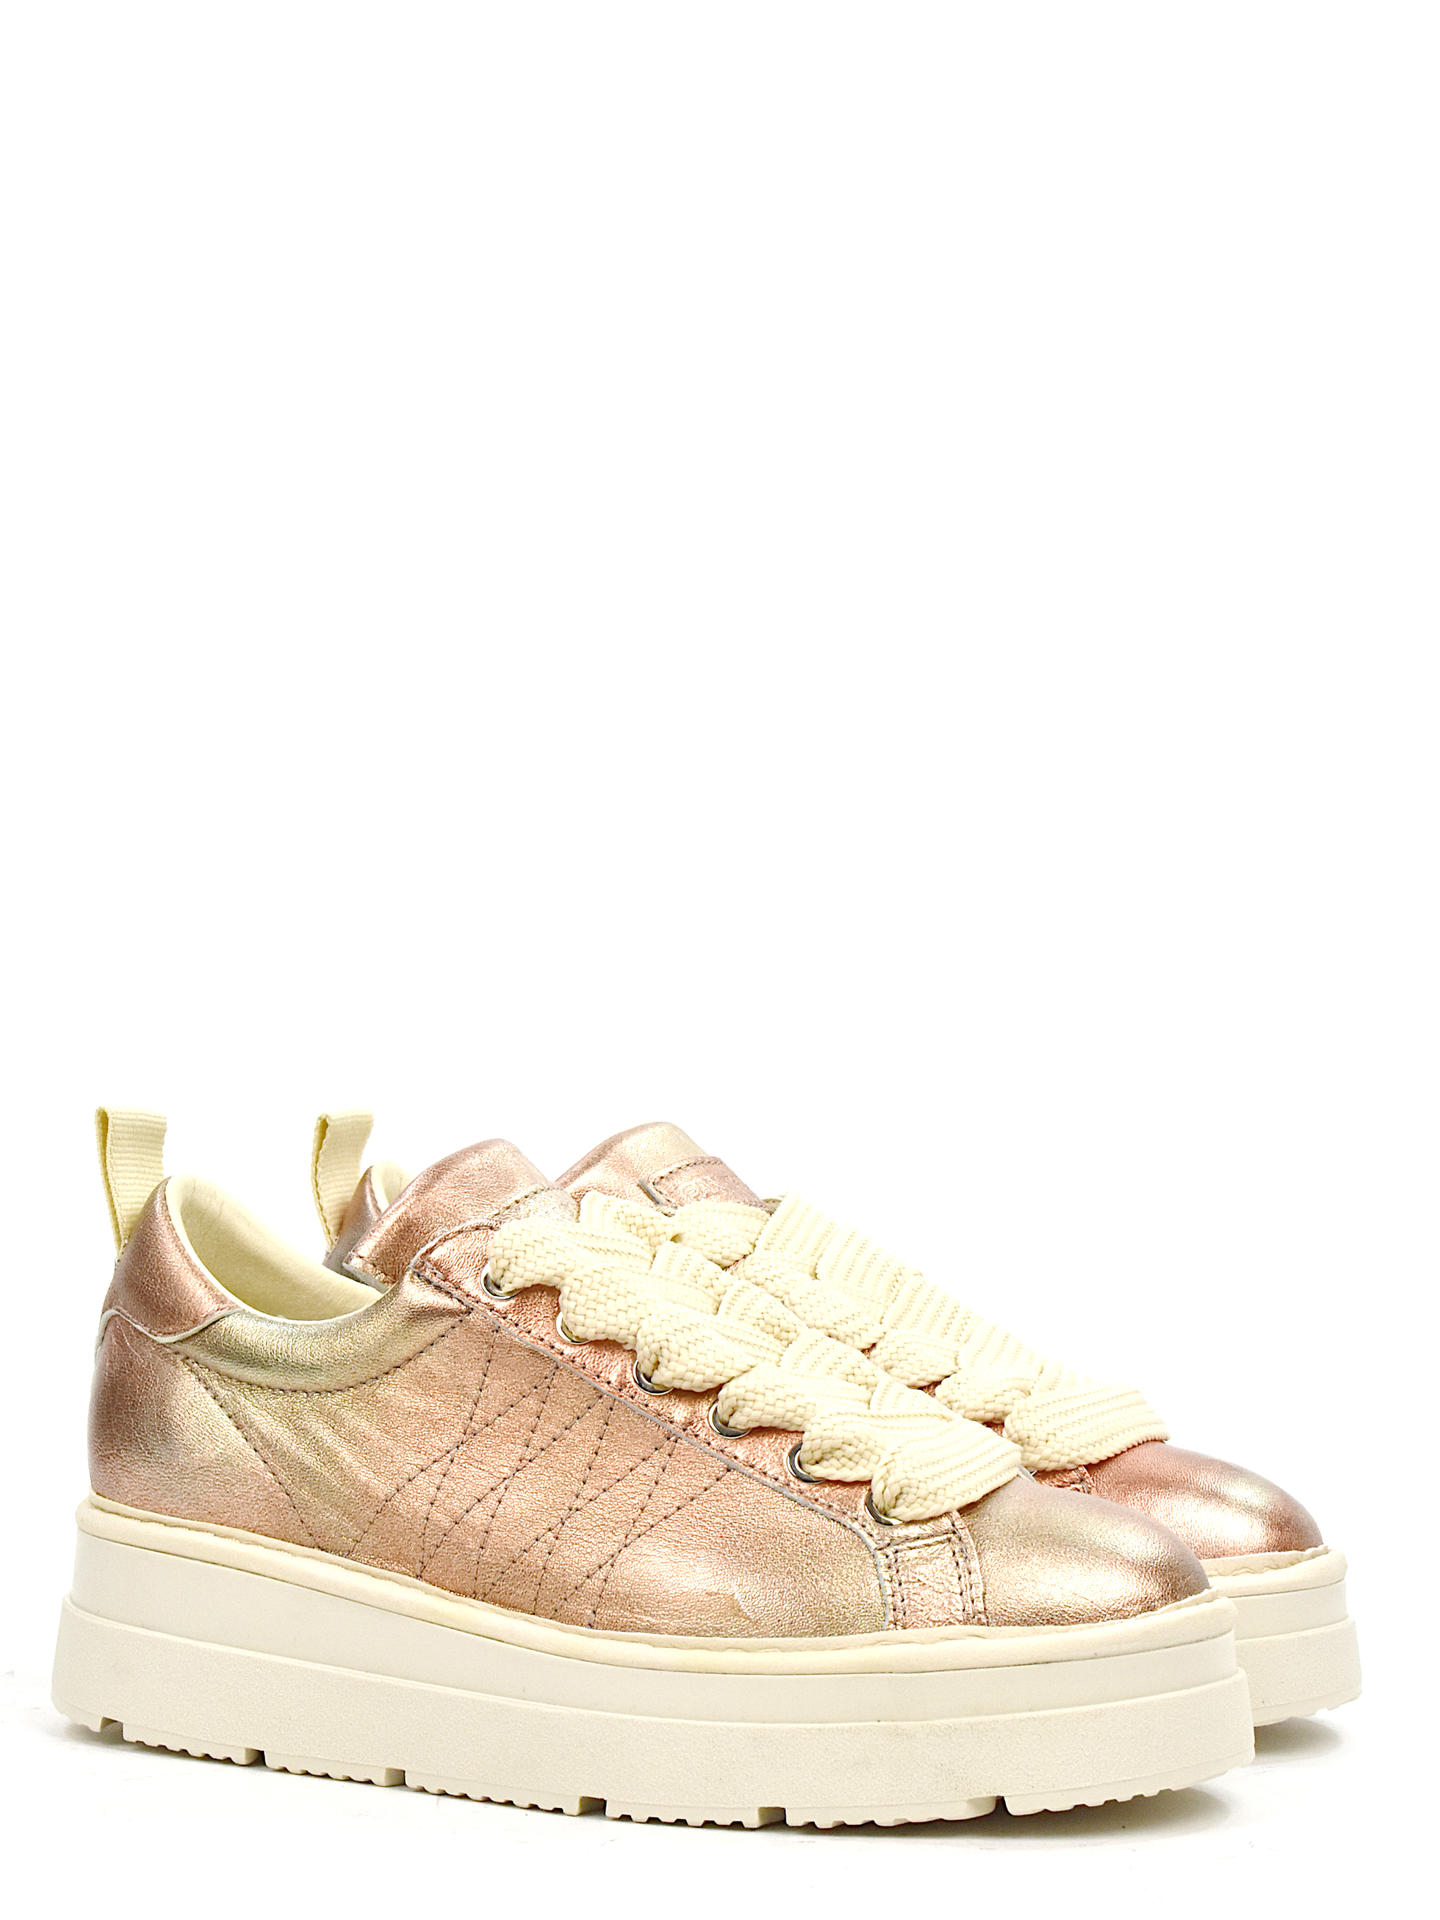 SNEAKERS PANCHIC 32Y012 ORO